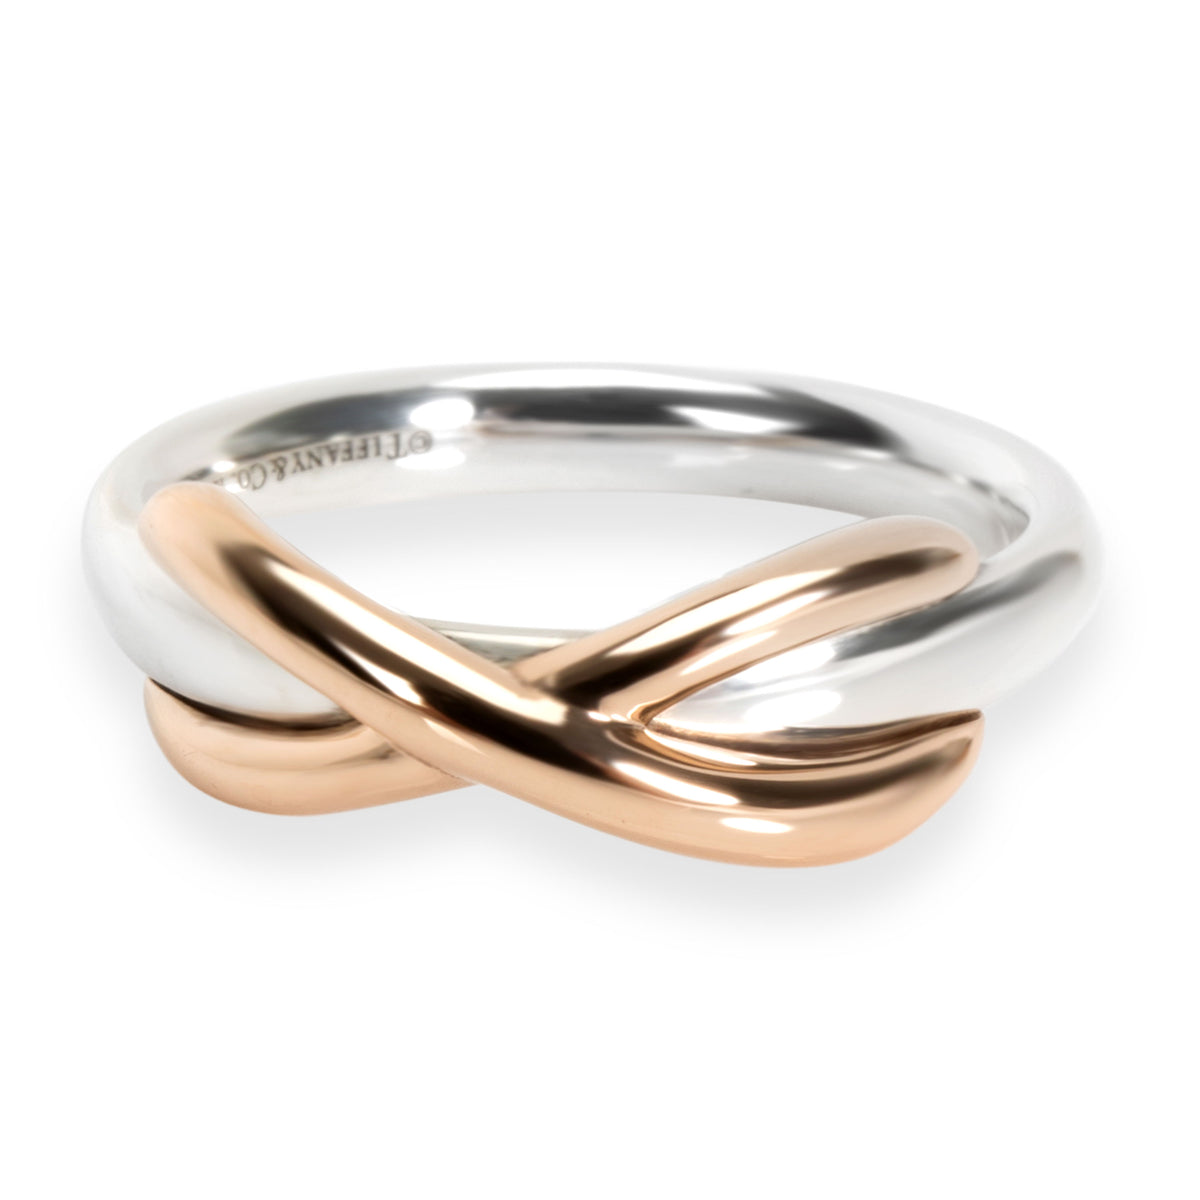 Tiffany & Co. Infinity Ring in Sterling & 18KT Gold